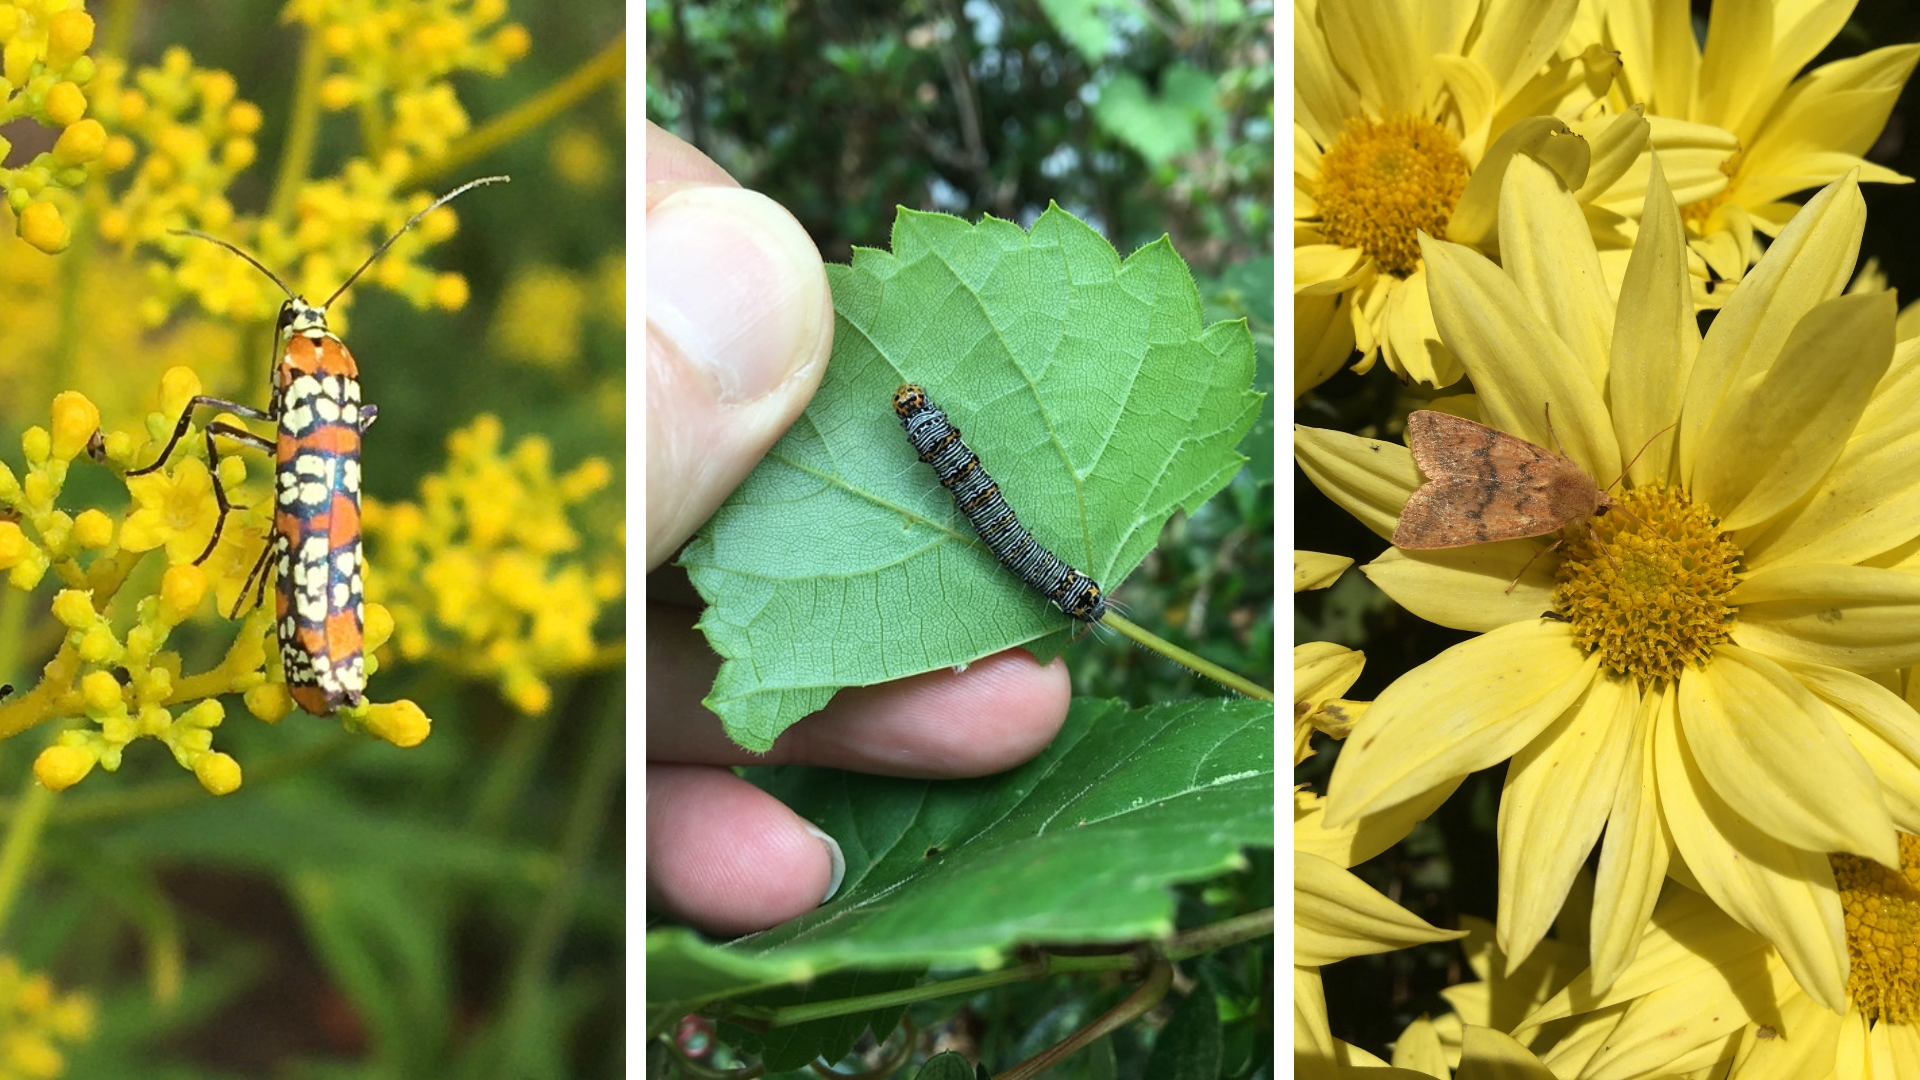 3 images. Left and right show adult moths on flowers; center image shows caterpillar on leaf.